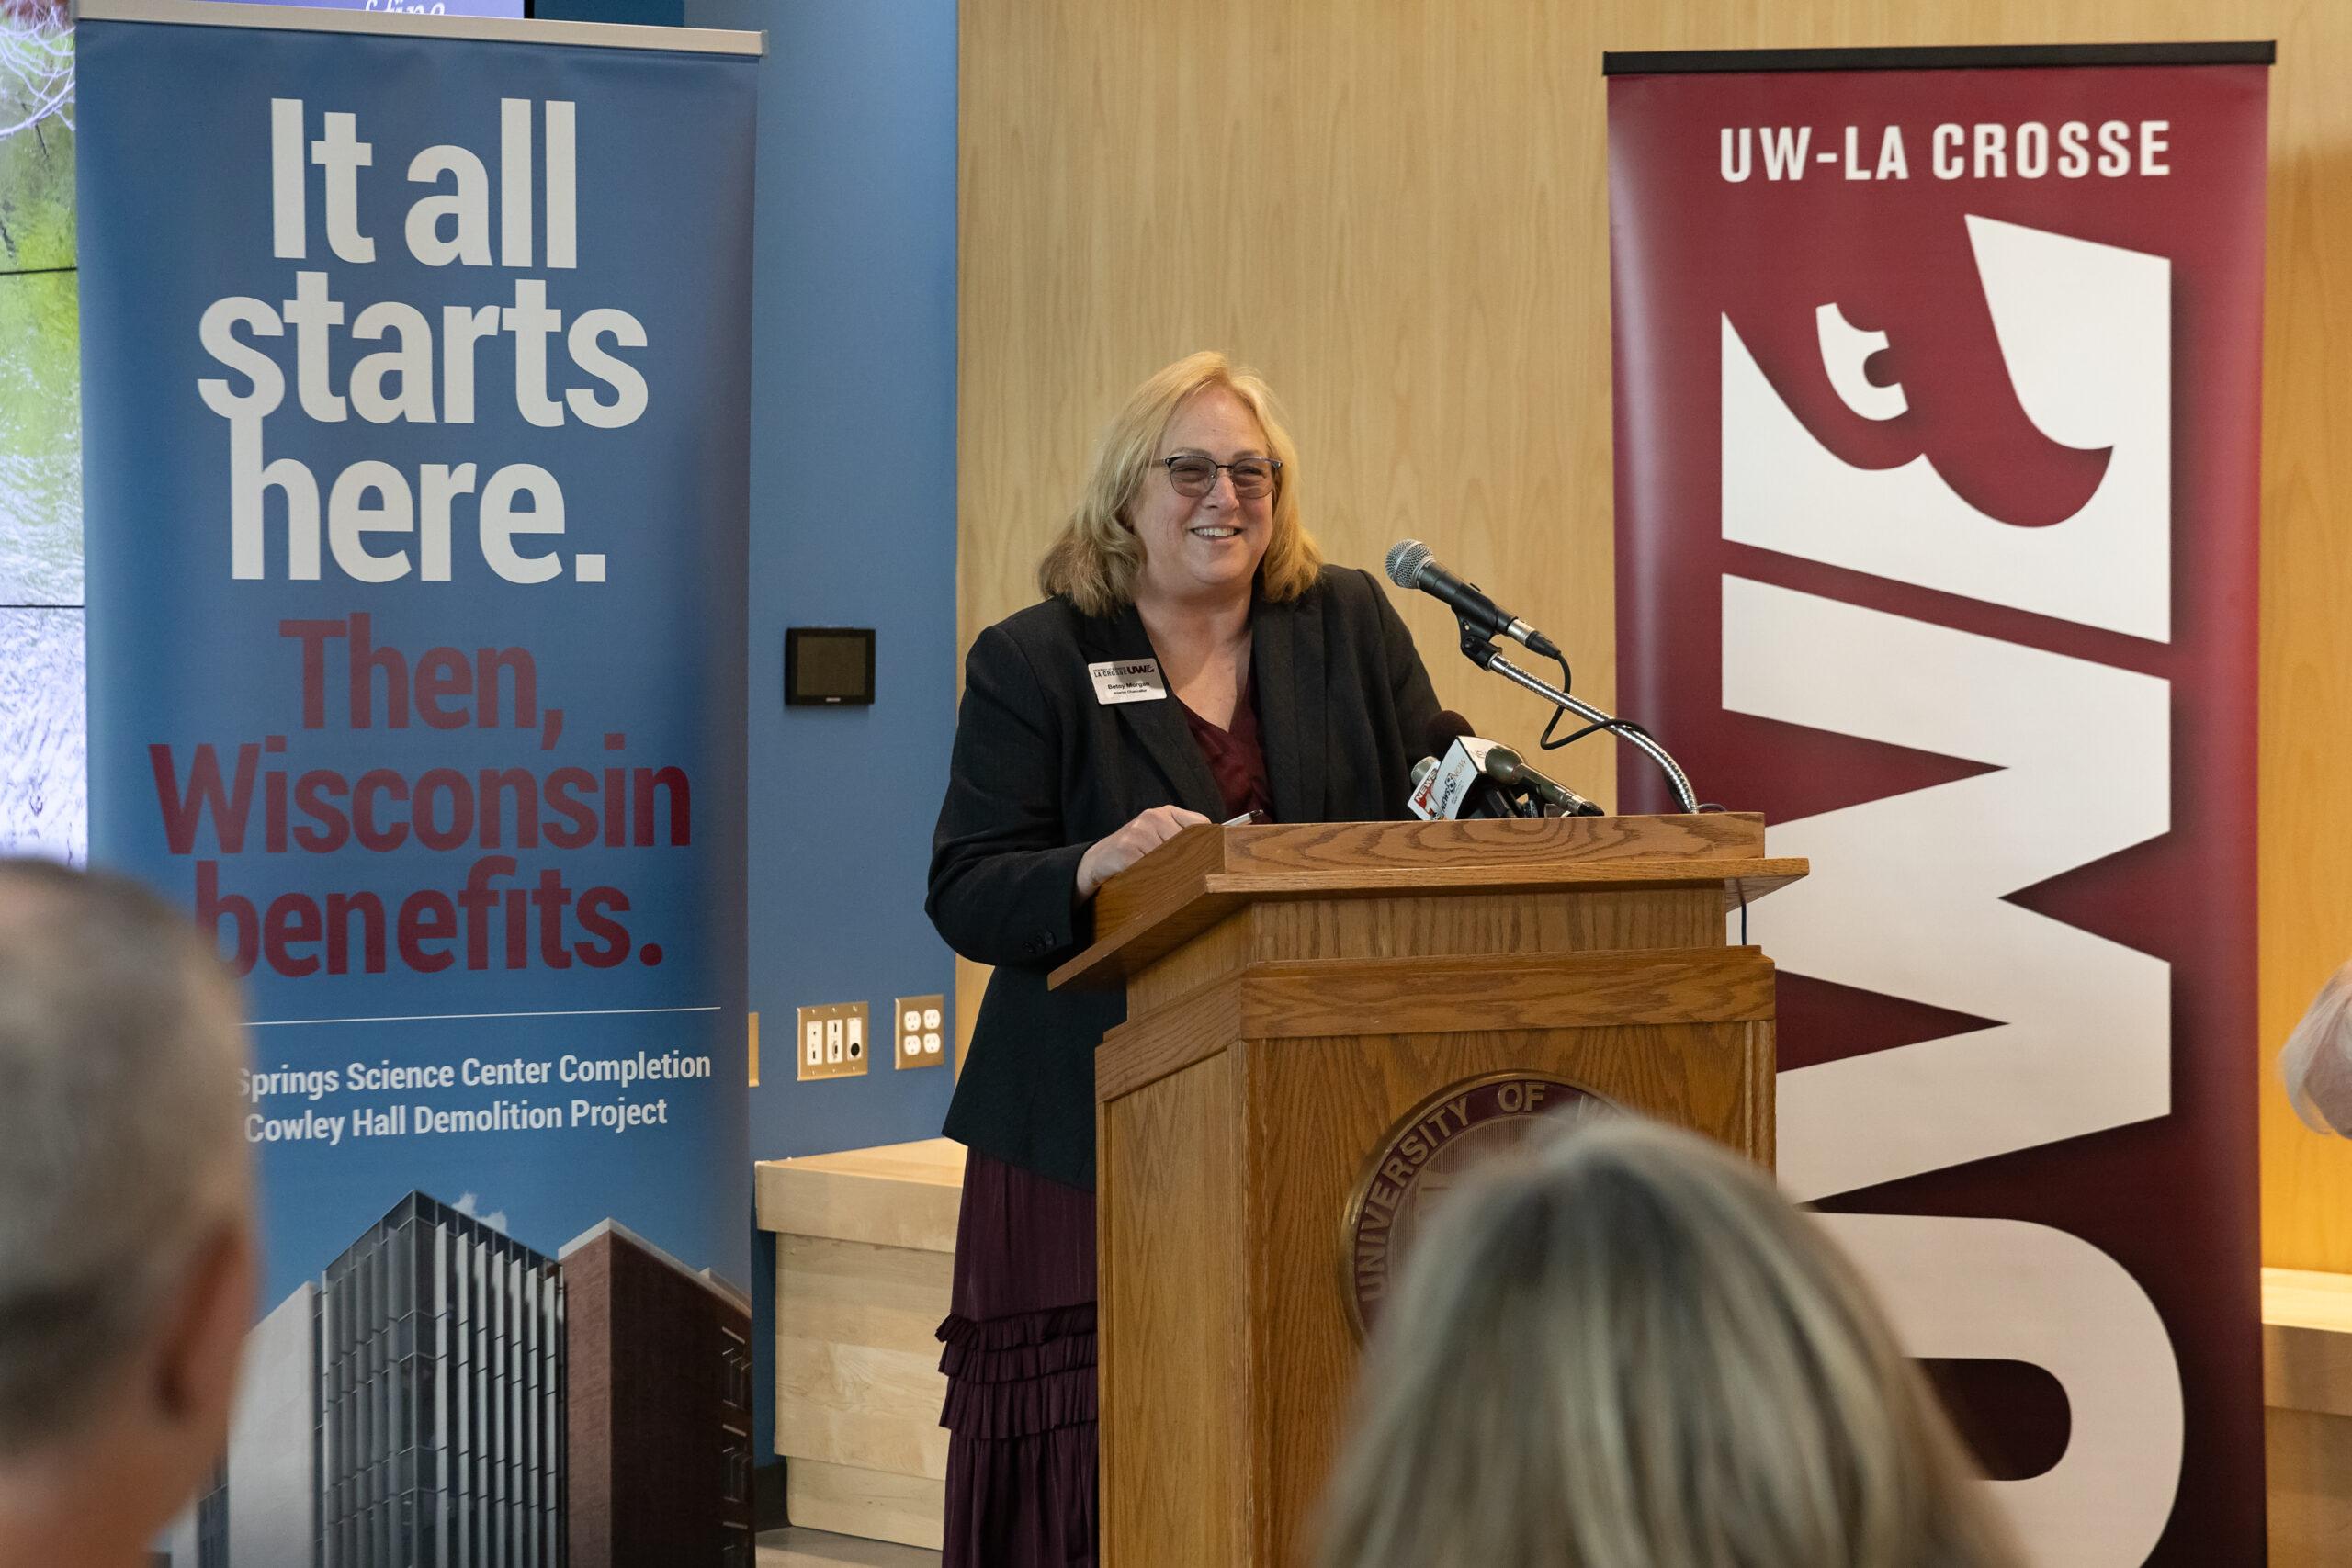 UW-La Crosse gifted $2.8M to support science research